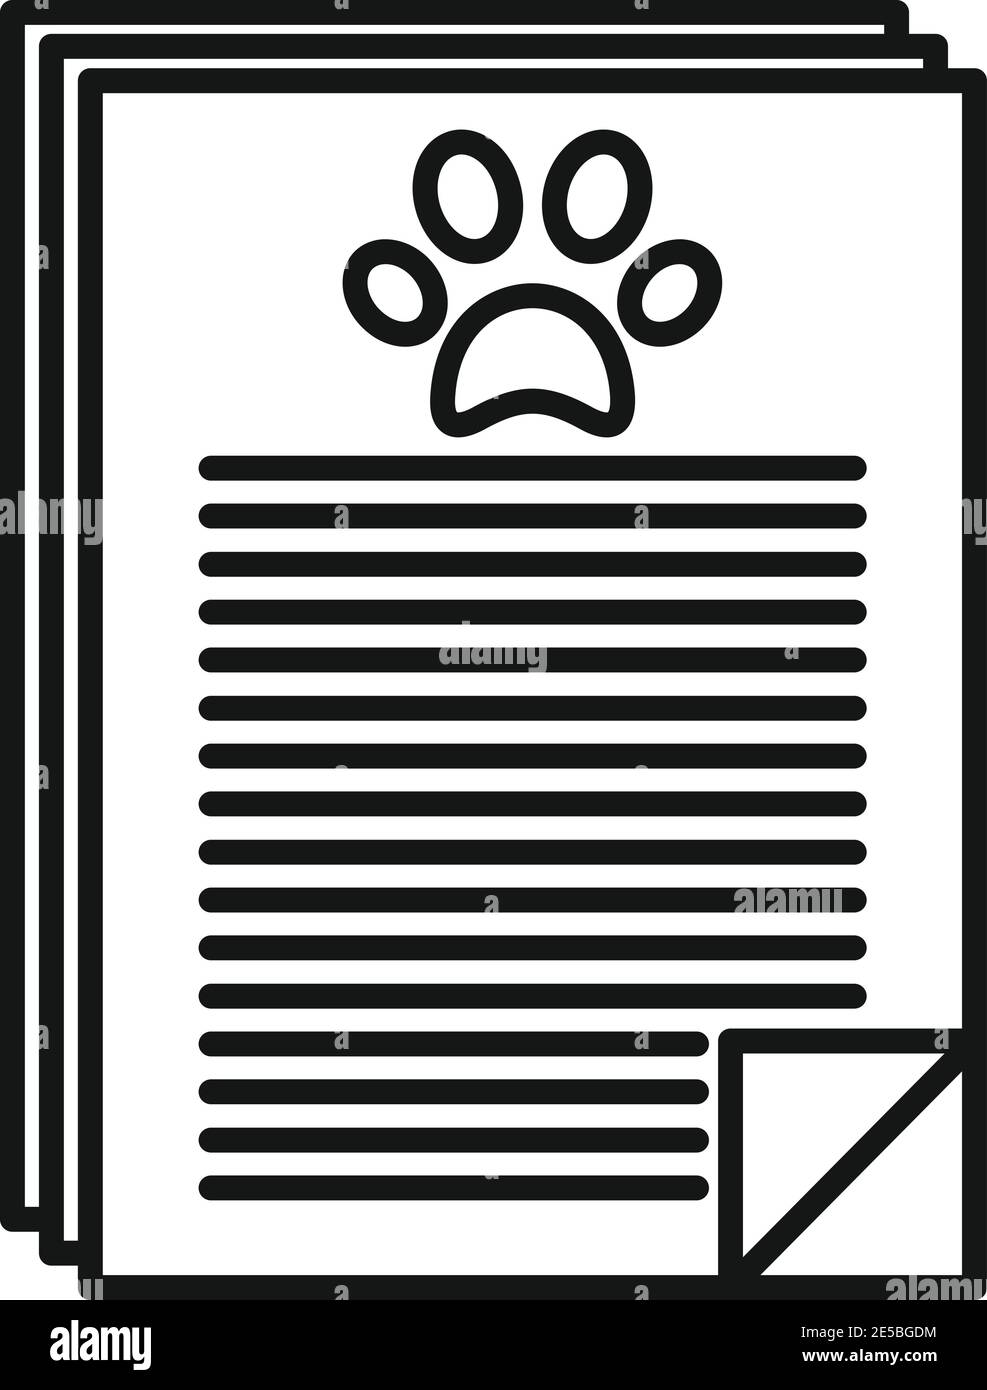 Dog documents icon, outline style Stock Vector